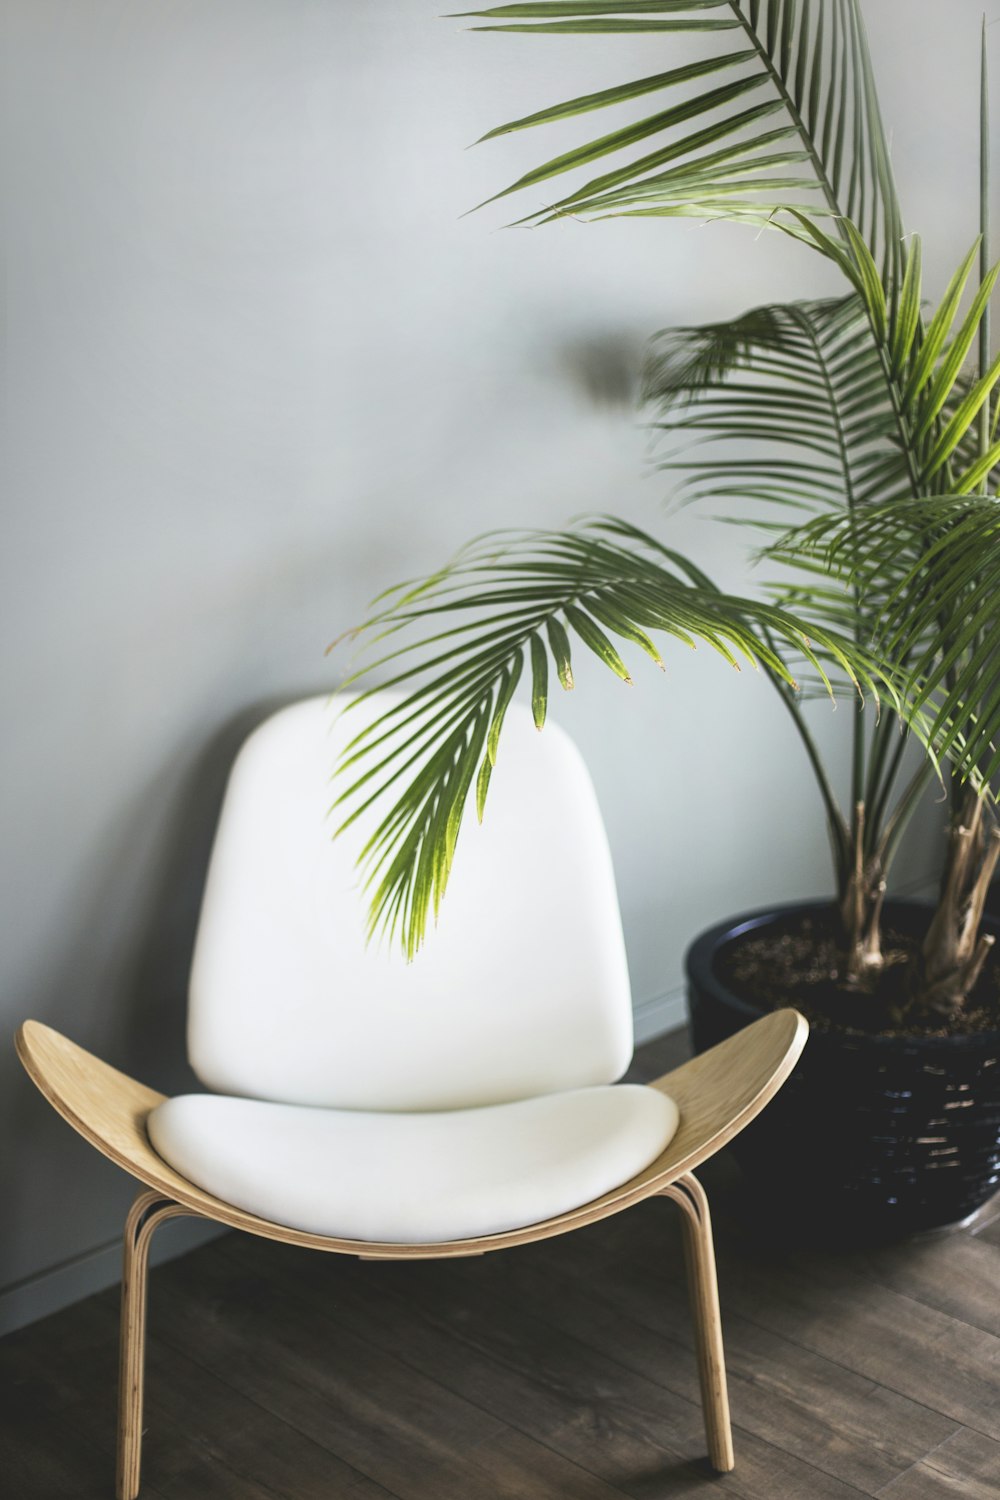 brown wooden chair beside plant